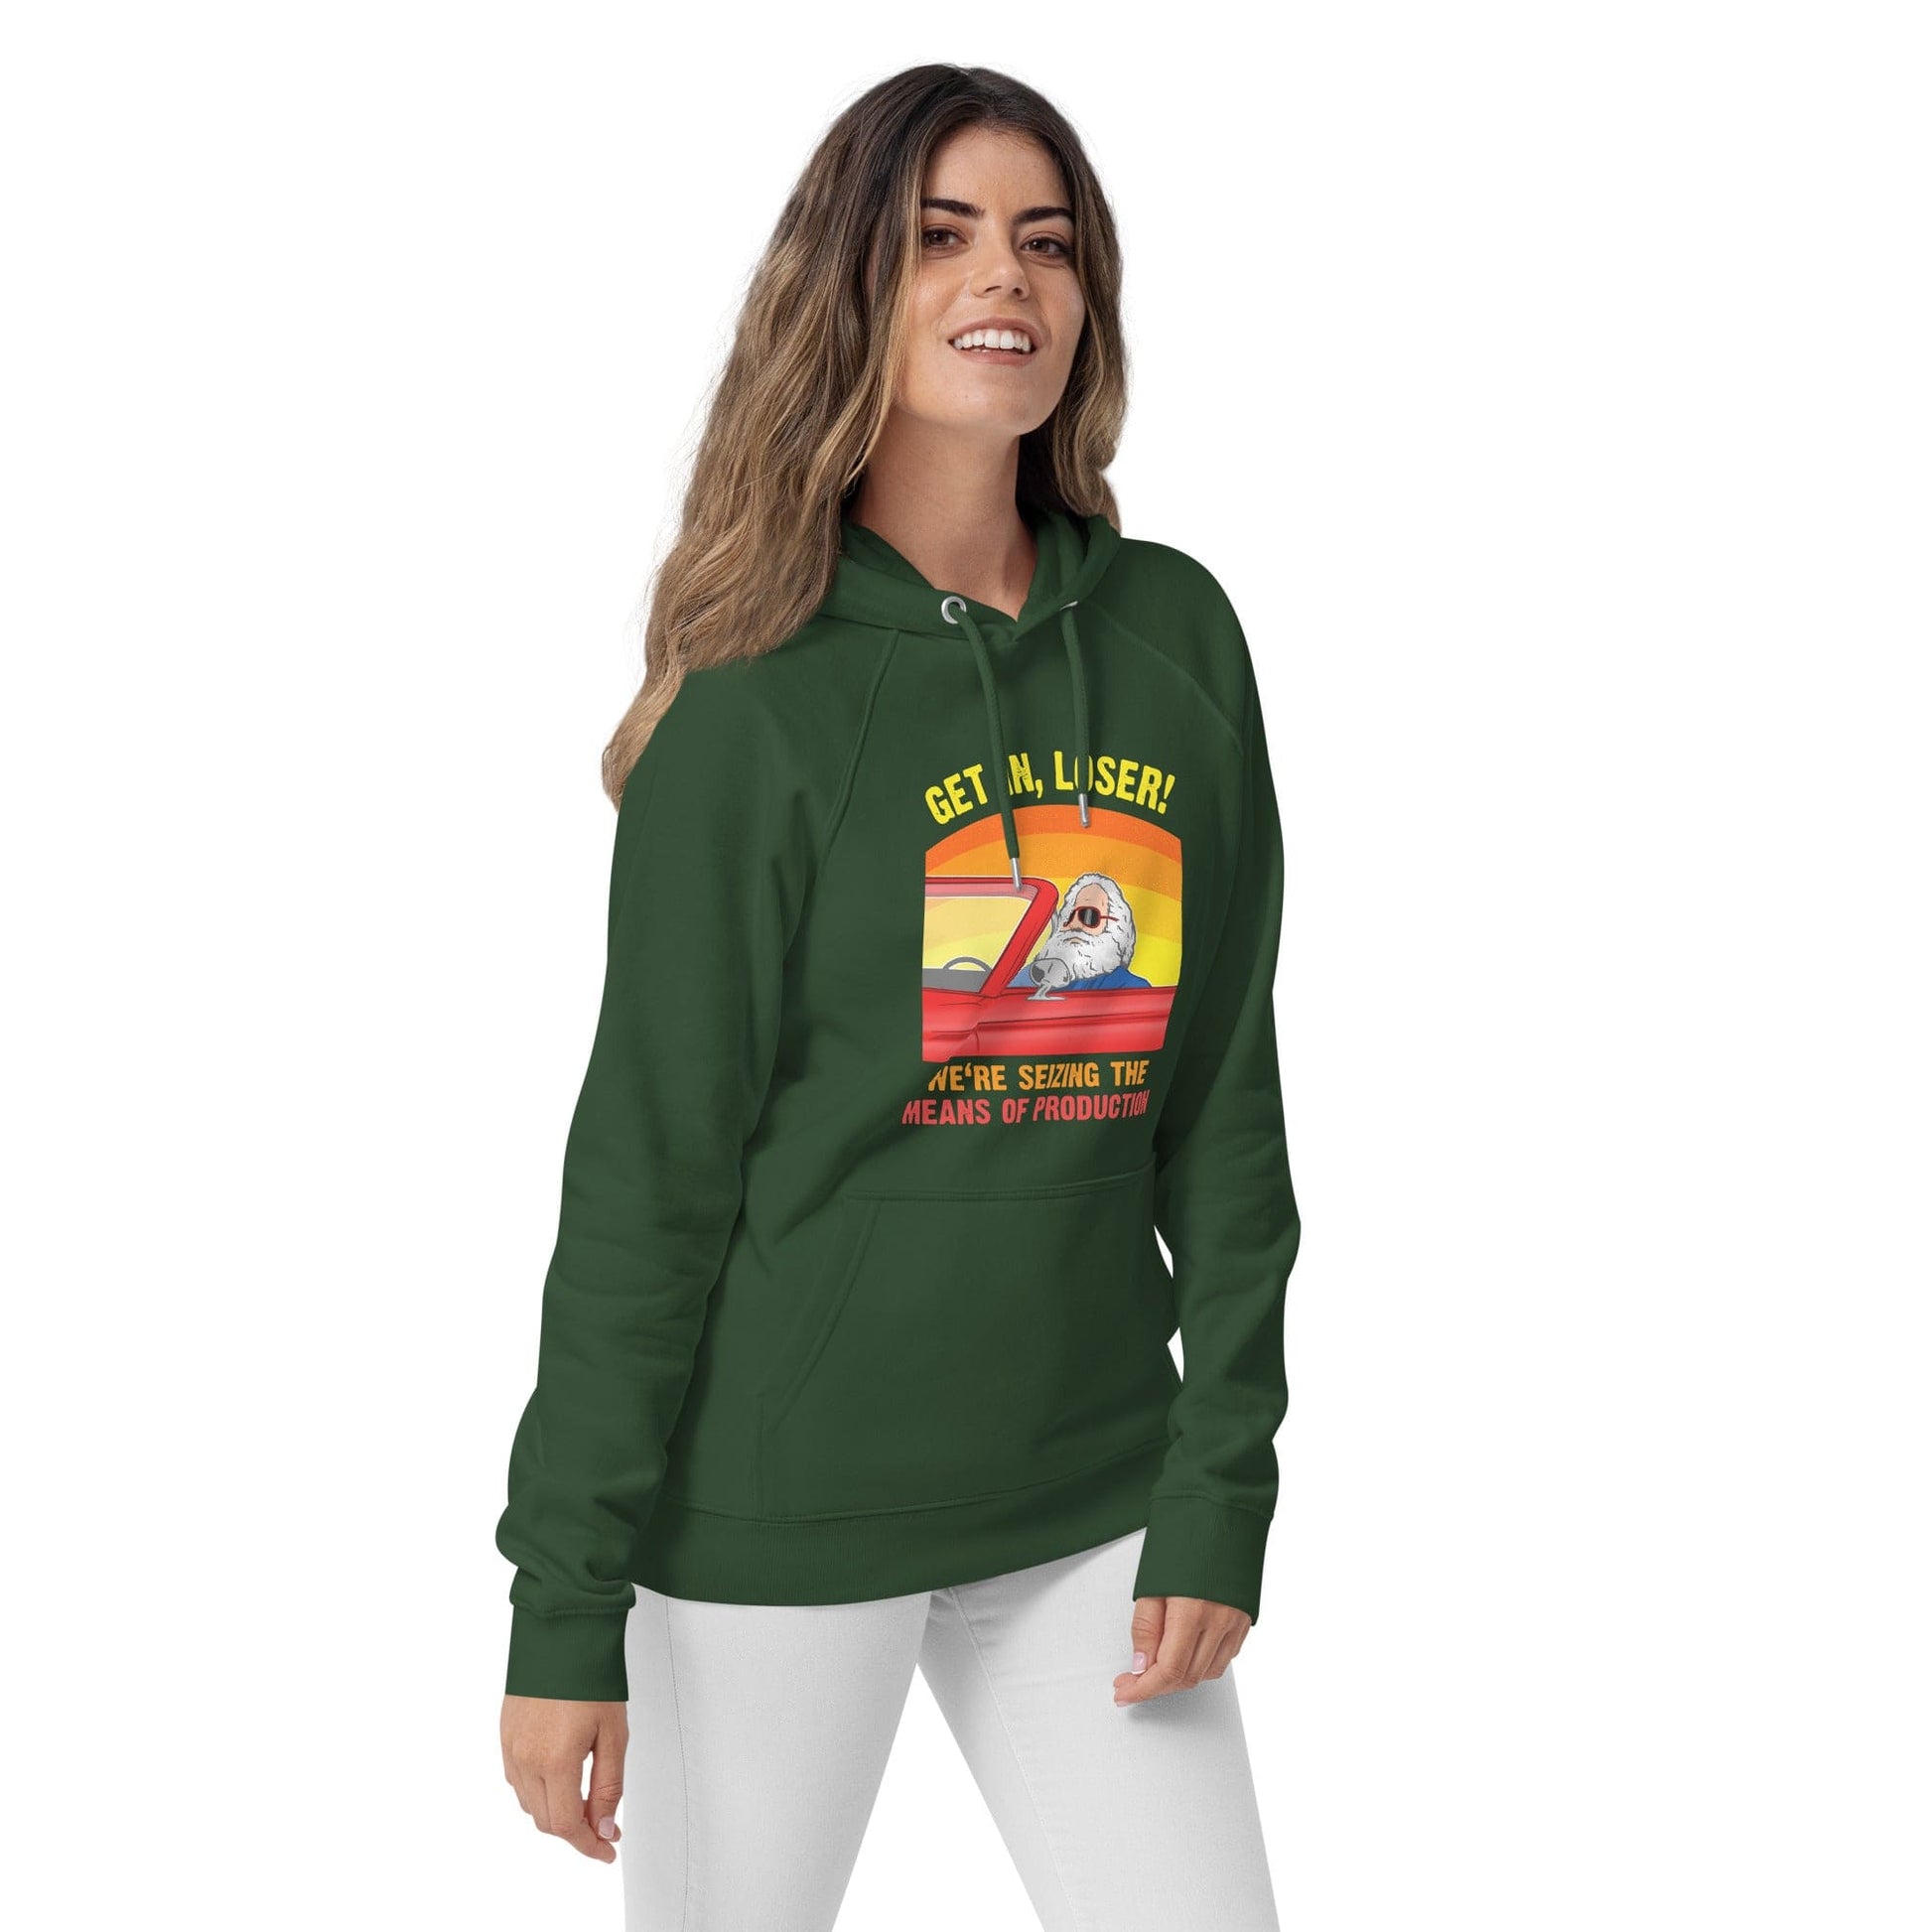 Karl Marx - Get in, Loser - We're seizing the means of production - Eco Hoodie